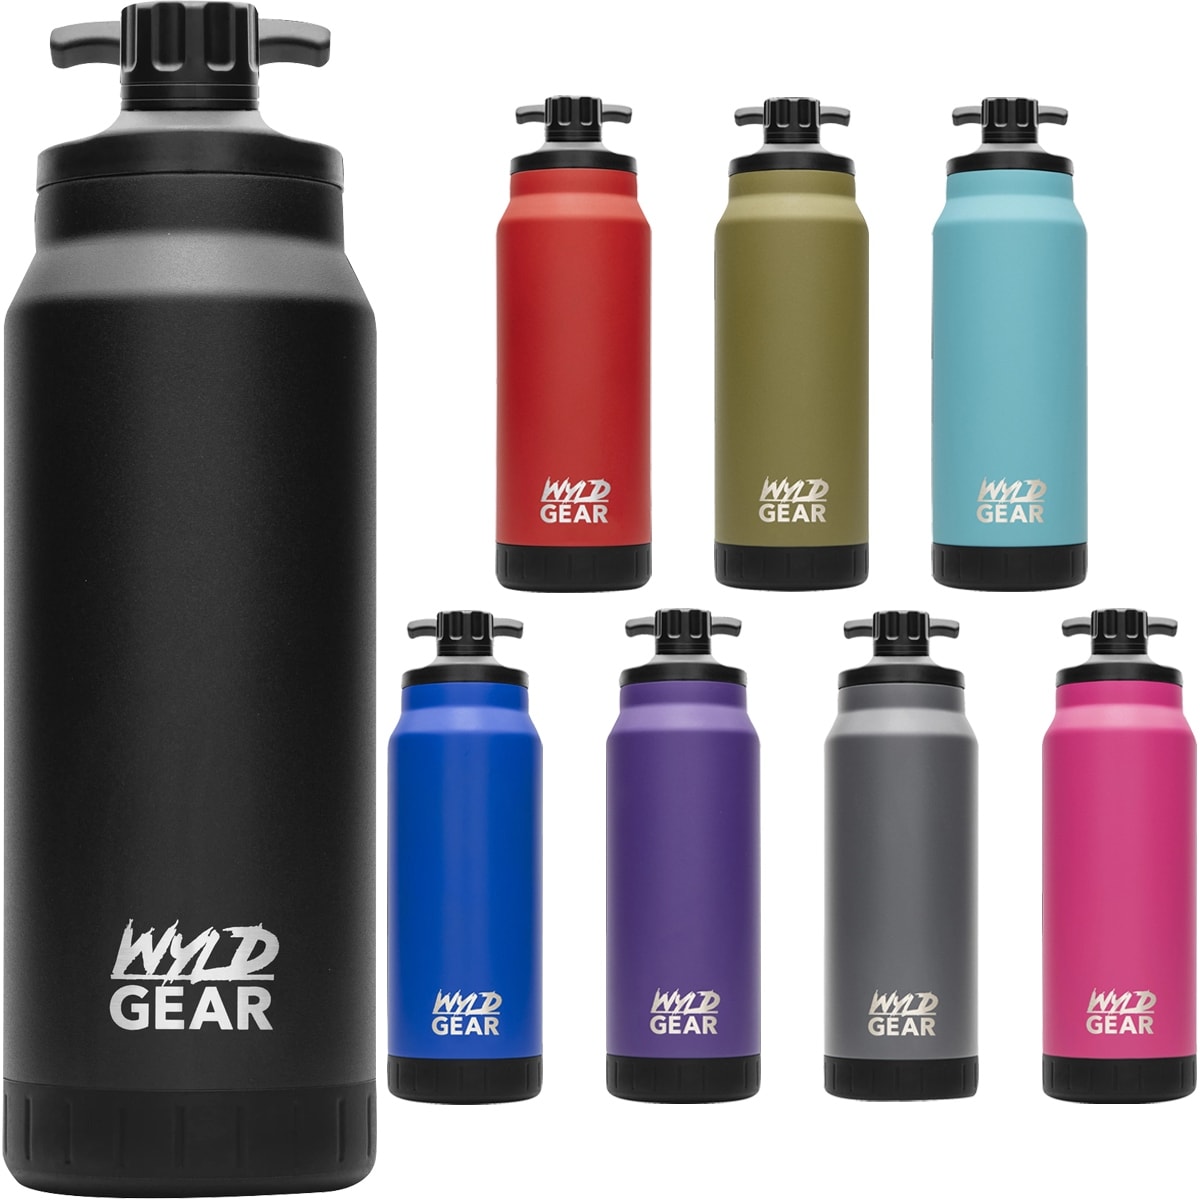 https://ak1.ostkcdn.com/images/products/is/images/direct/7e9738ba02ab4b51709fbcc1648e4e0410d2335d/Wyld-Gear-Mag-Series-44-oz.-Insulated-Stainless-Steel-Water-Bottle.jpg